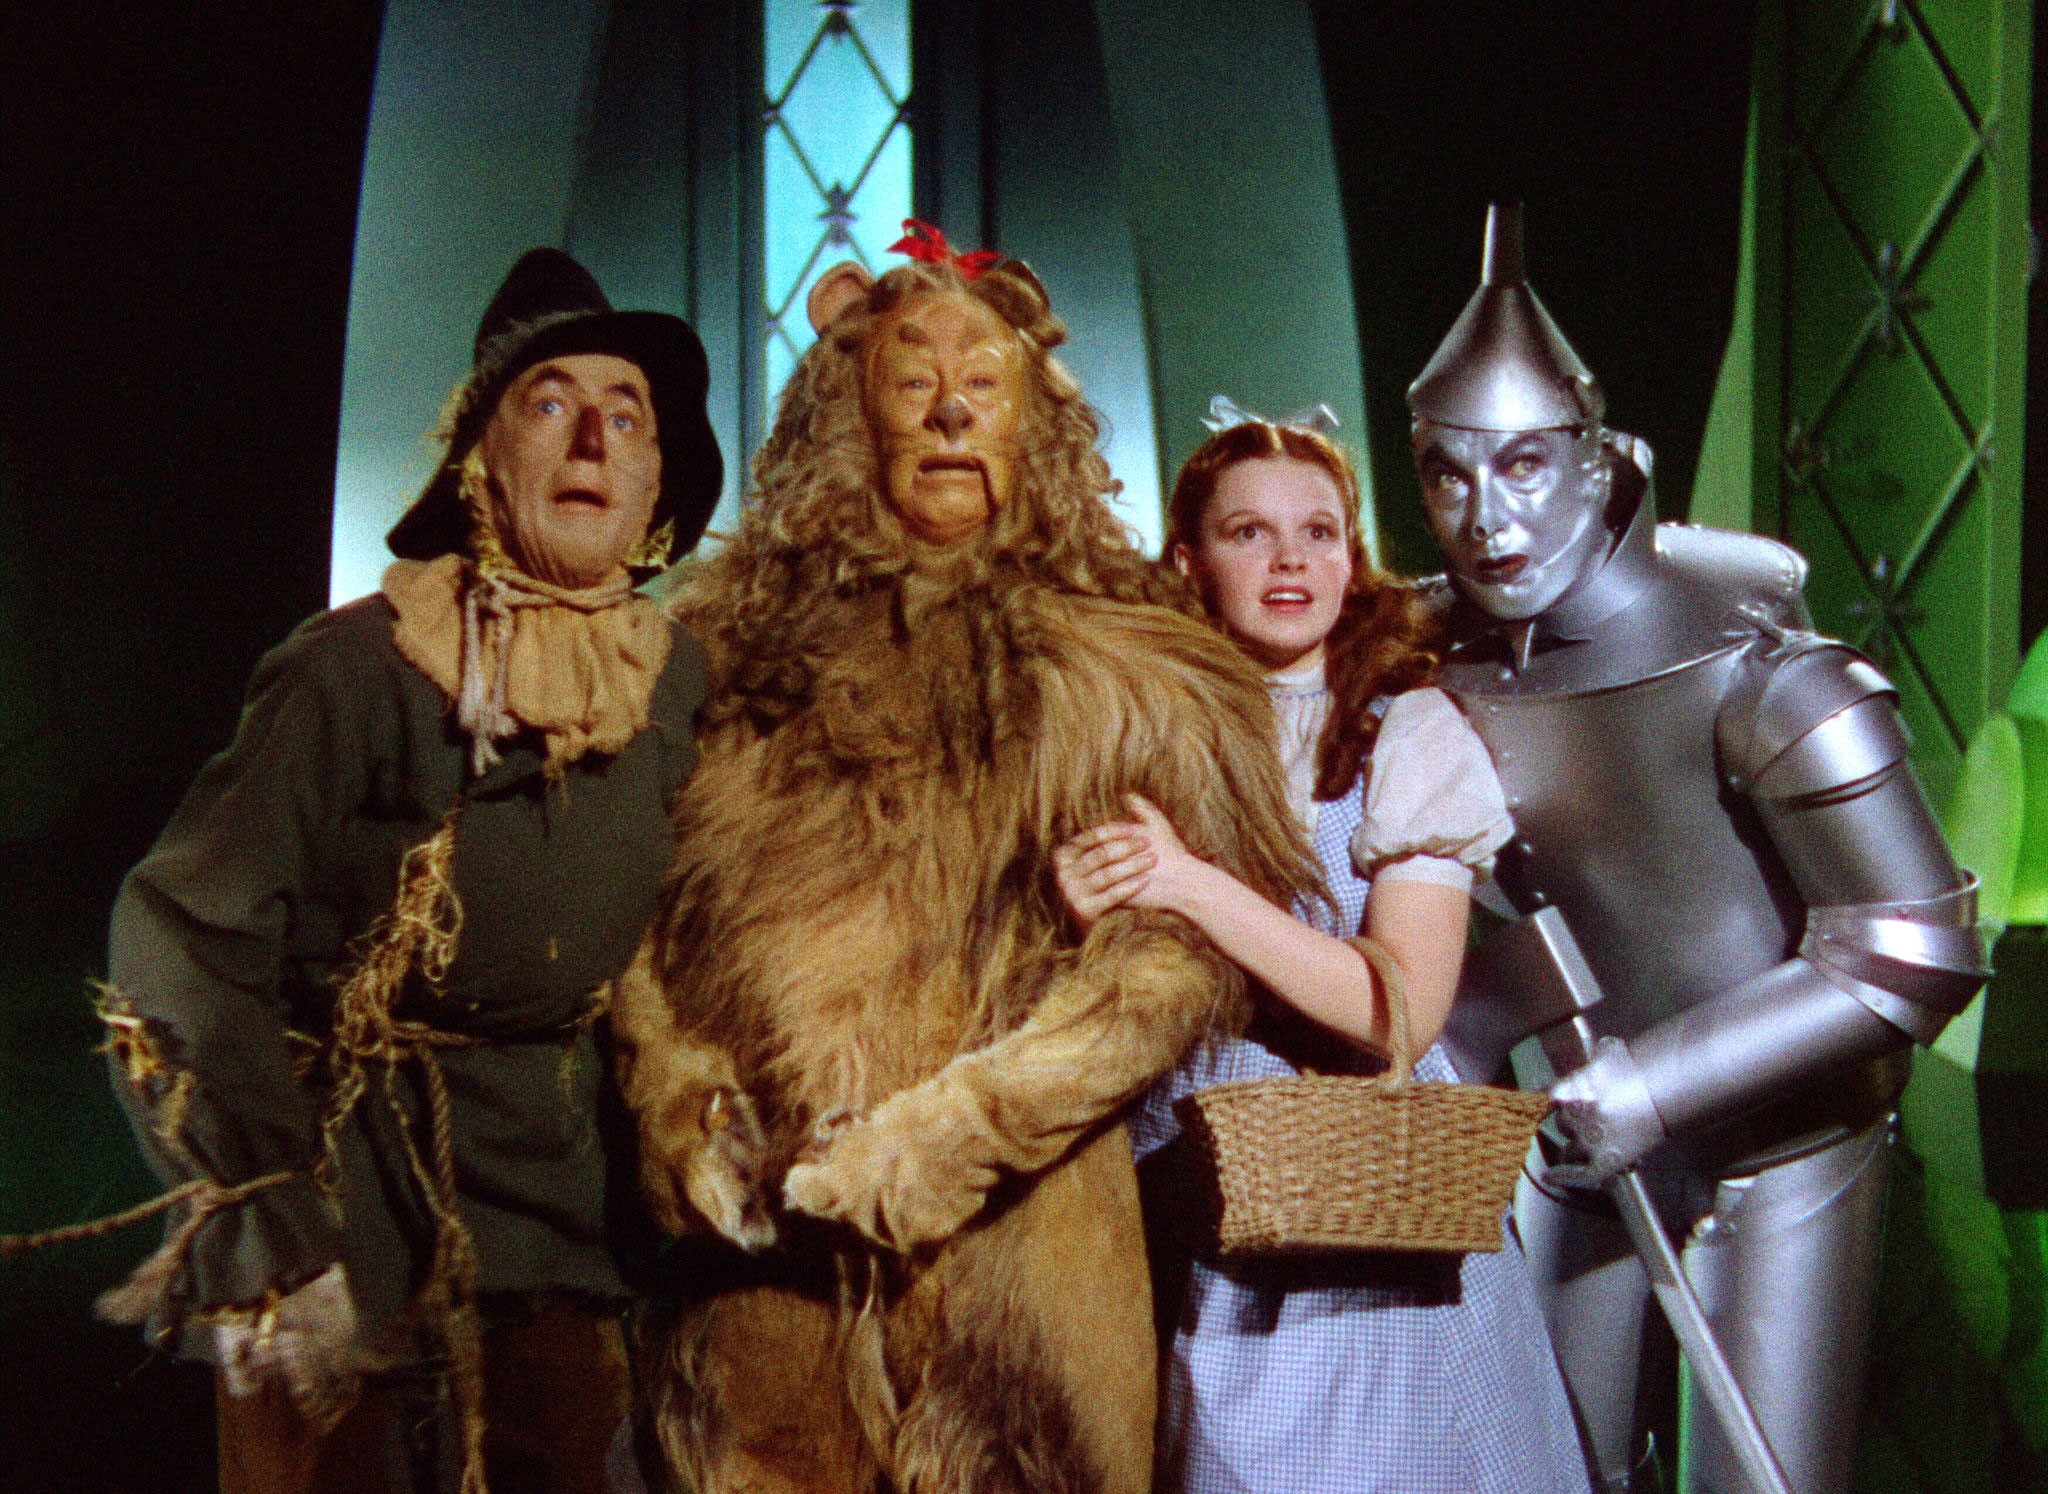 The Wizard of Oz being remade and already has director